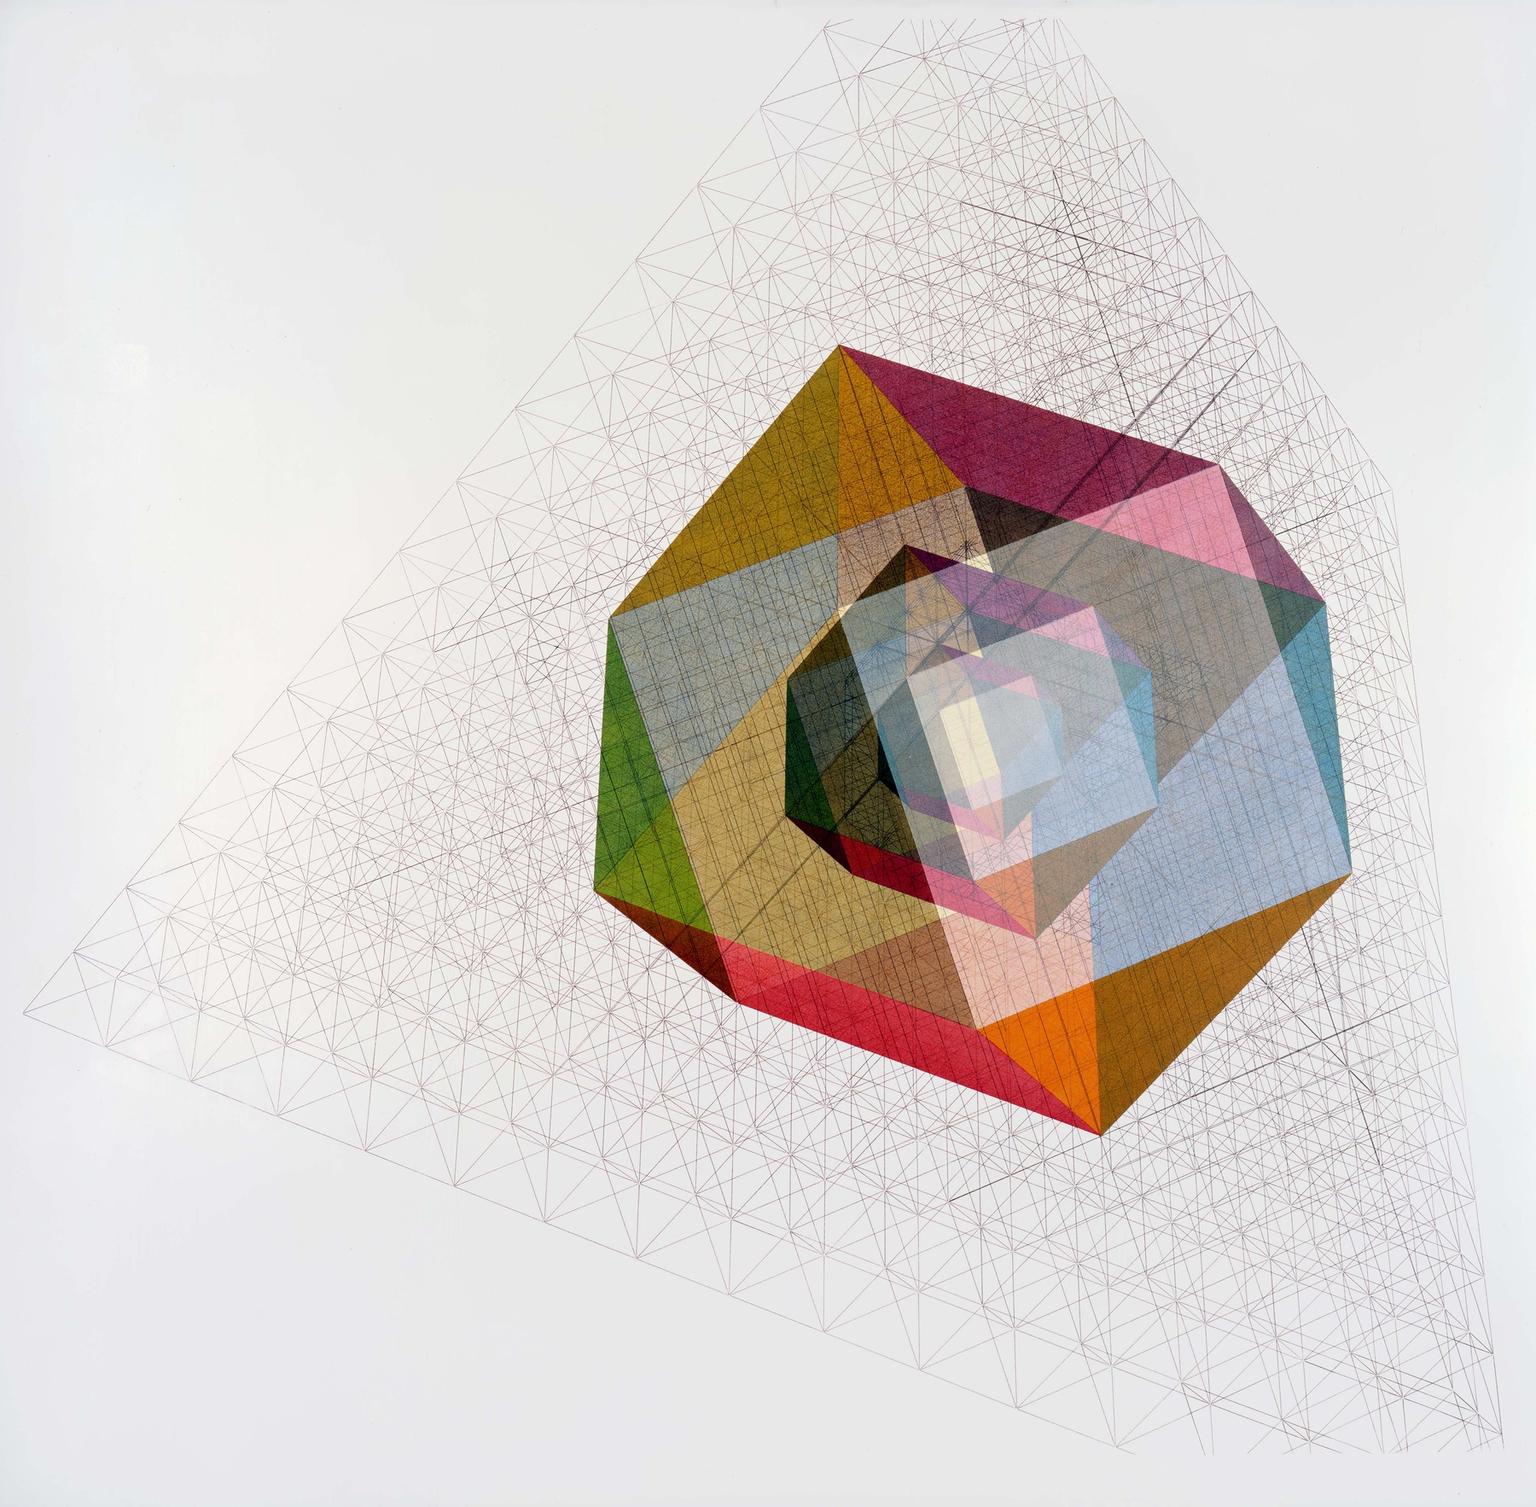 Image for entry 'Chrome 175  POLYTRANSPARENCY A: Oblique View of Cuboctahedrons Inherent in the 16-Frequency Tetrahedron'